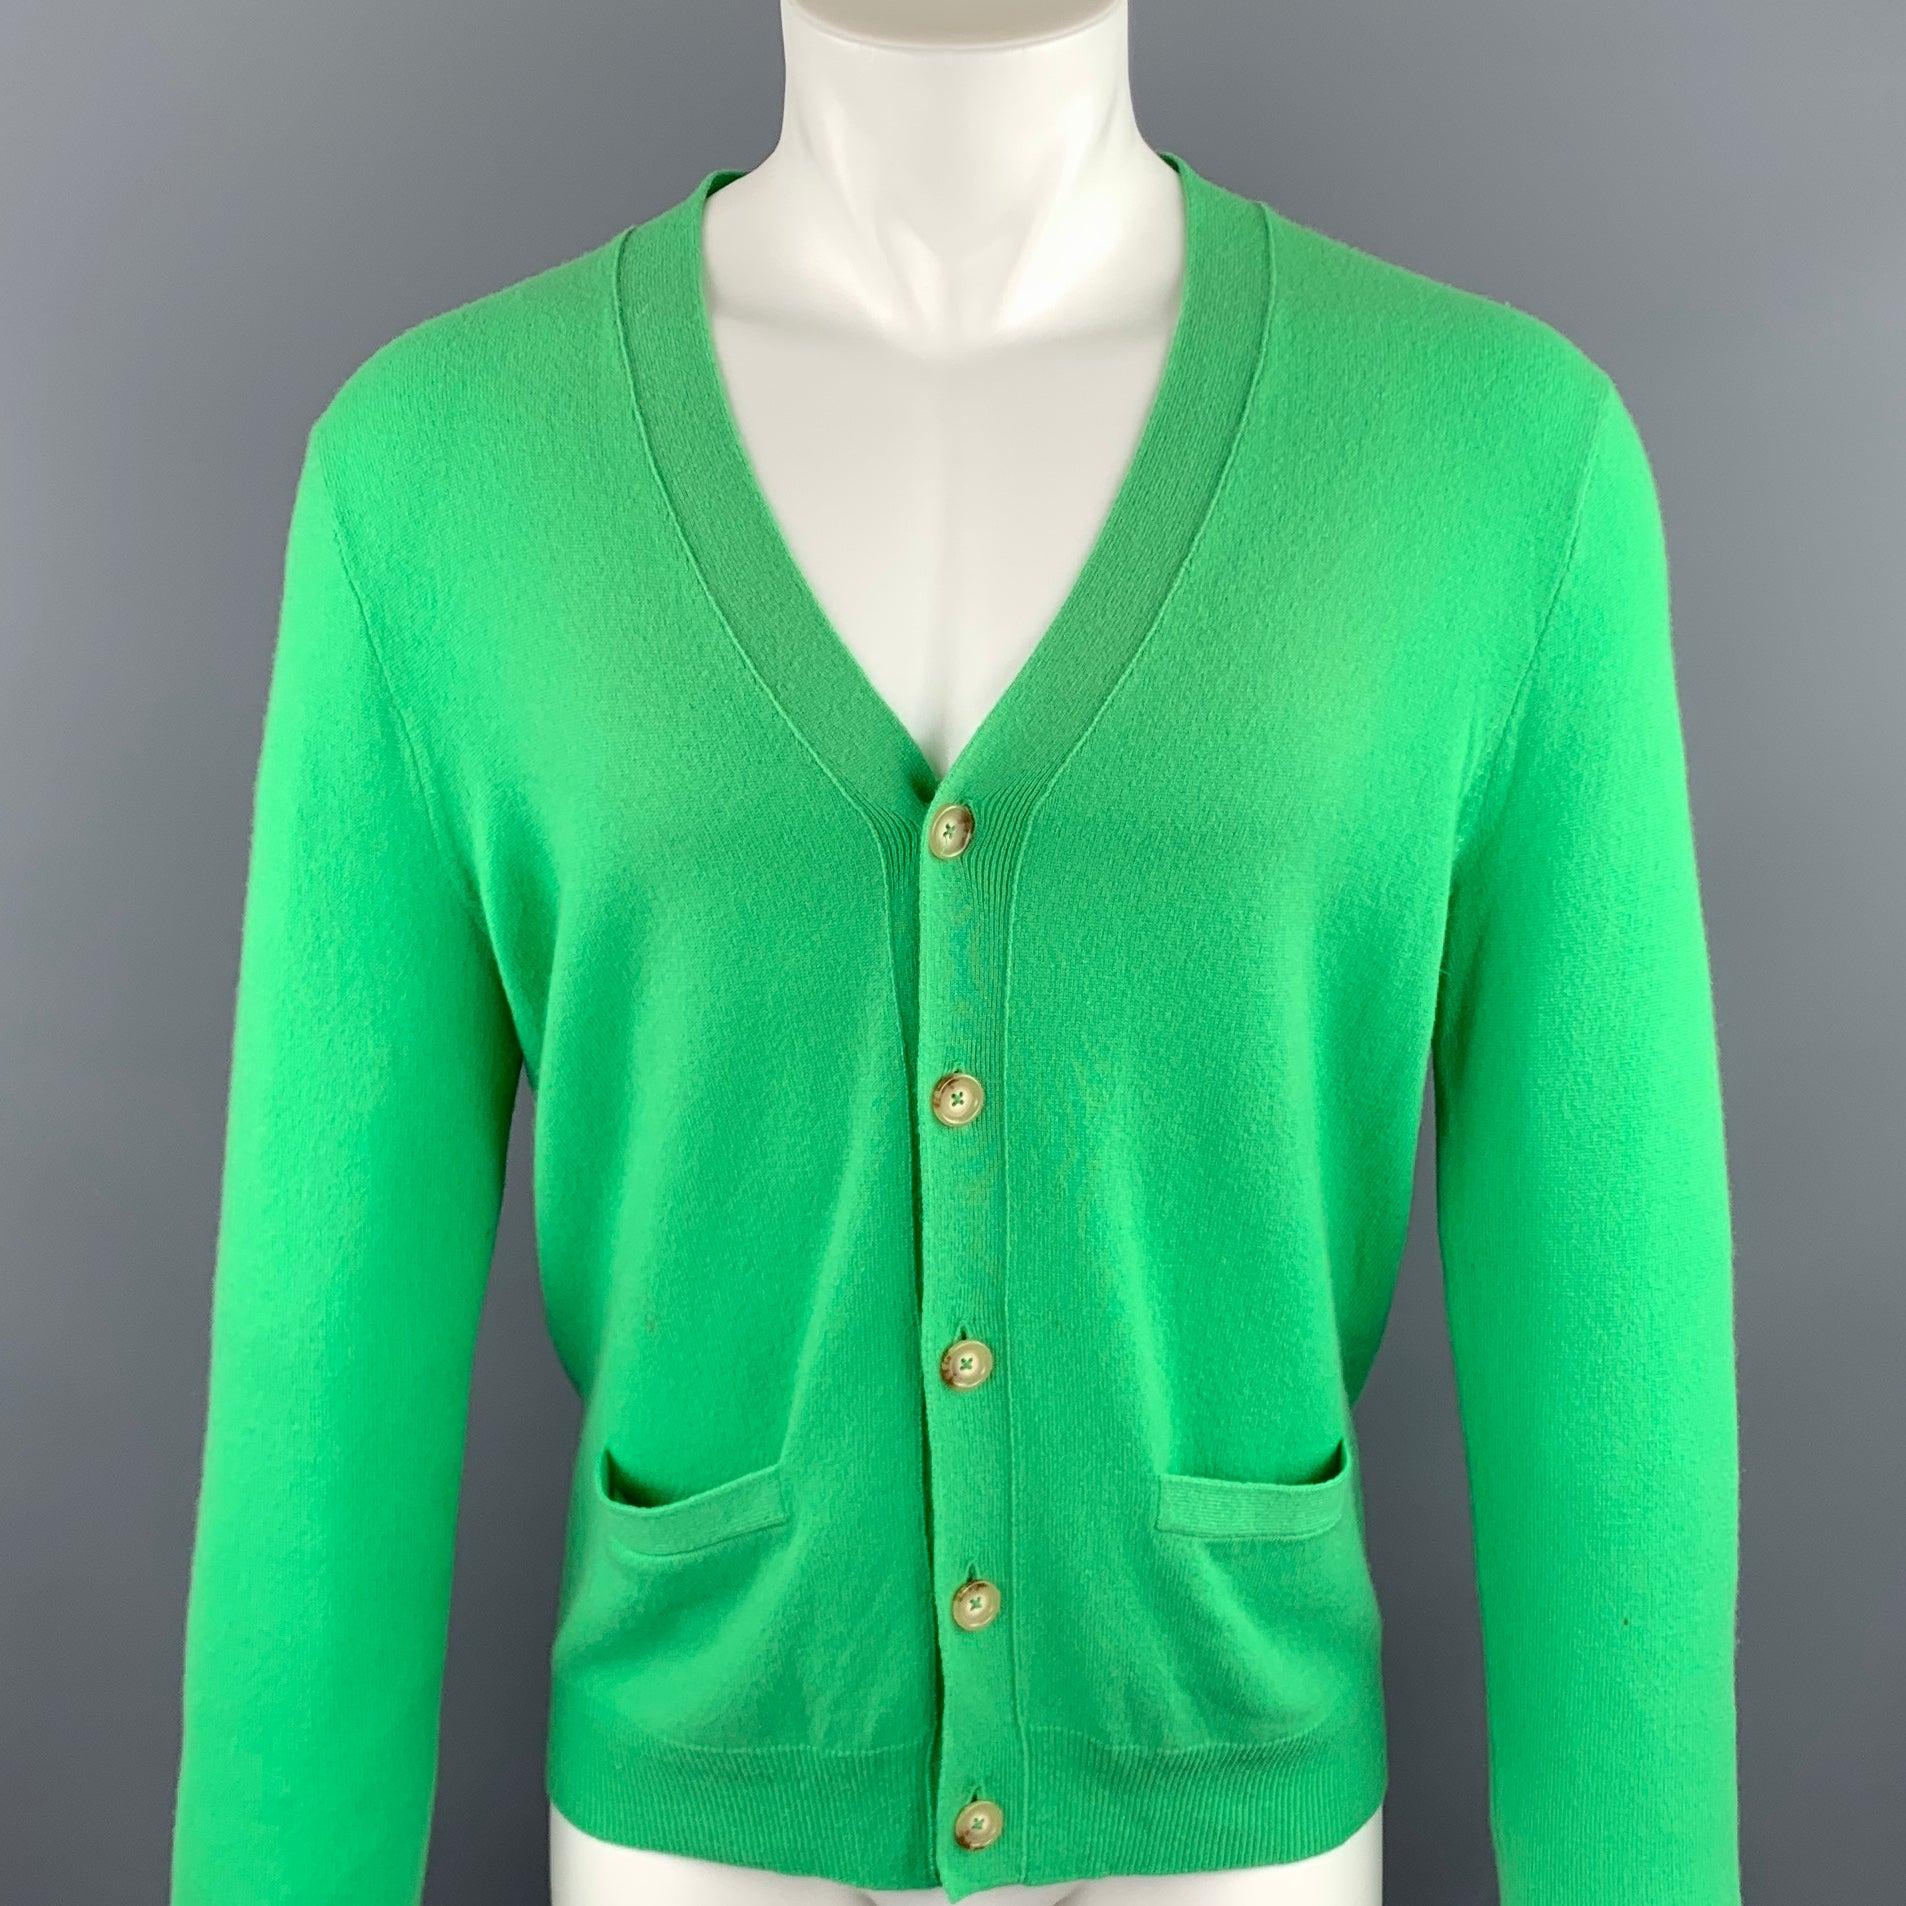 RALPH LAUREN cardigan green cashmere featuring slit pockets and a buttoned closure.New With Tags. 

Marked:   S 

Measurements: 
 
Shoulder: 16.5 inches  Chest: 38 inches  Sleeve: 26.5 inches  Length: 25.5 inches  
  
  
 
Reference: